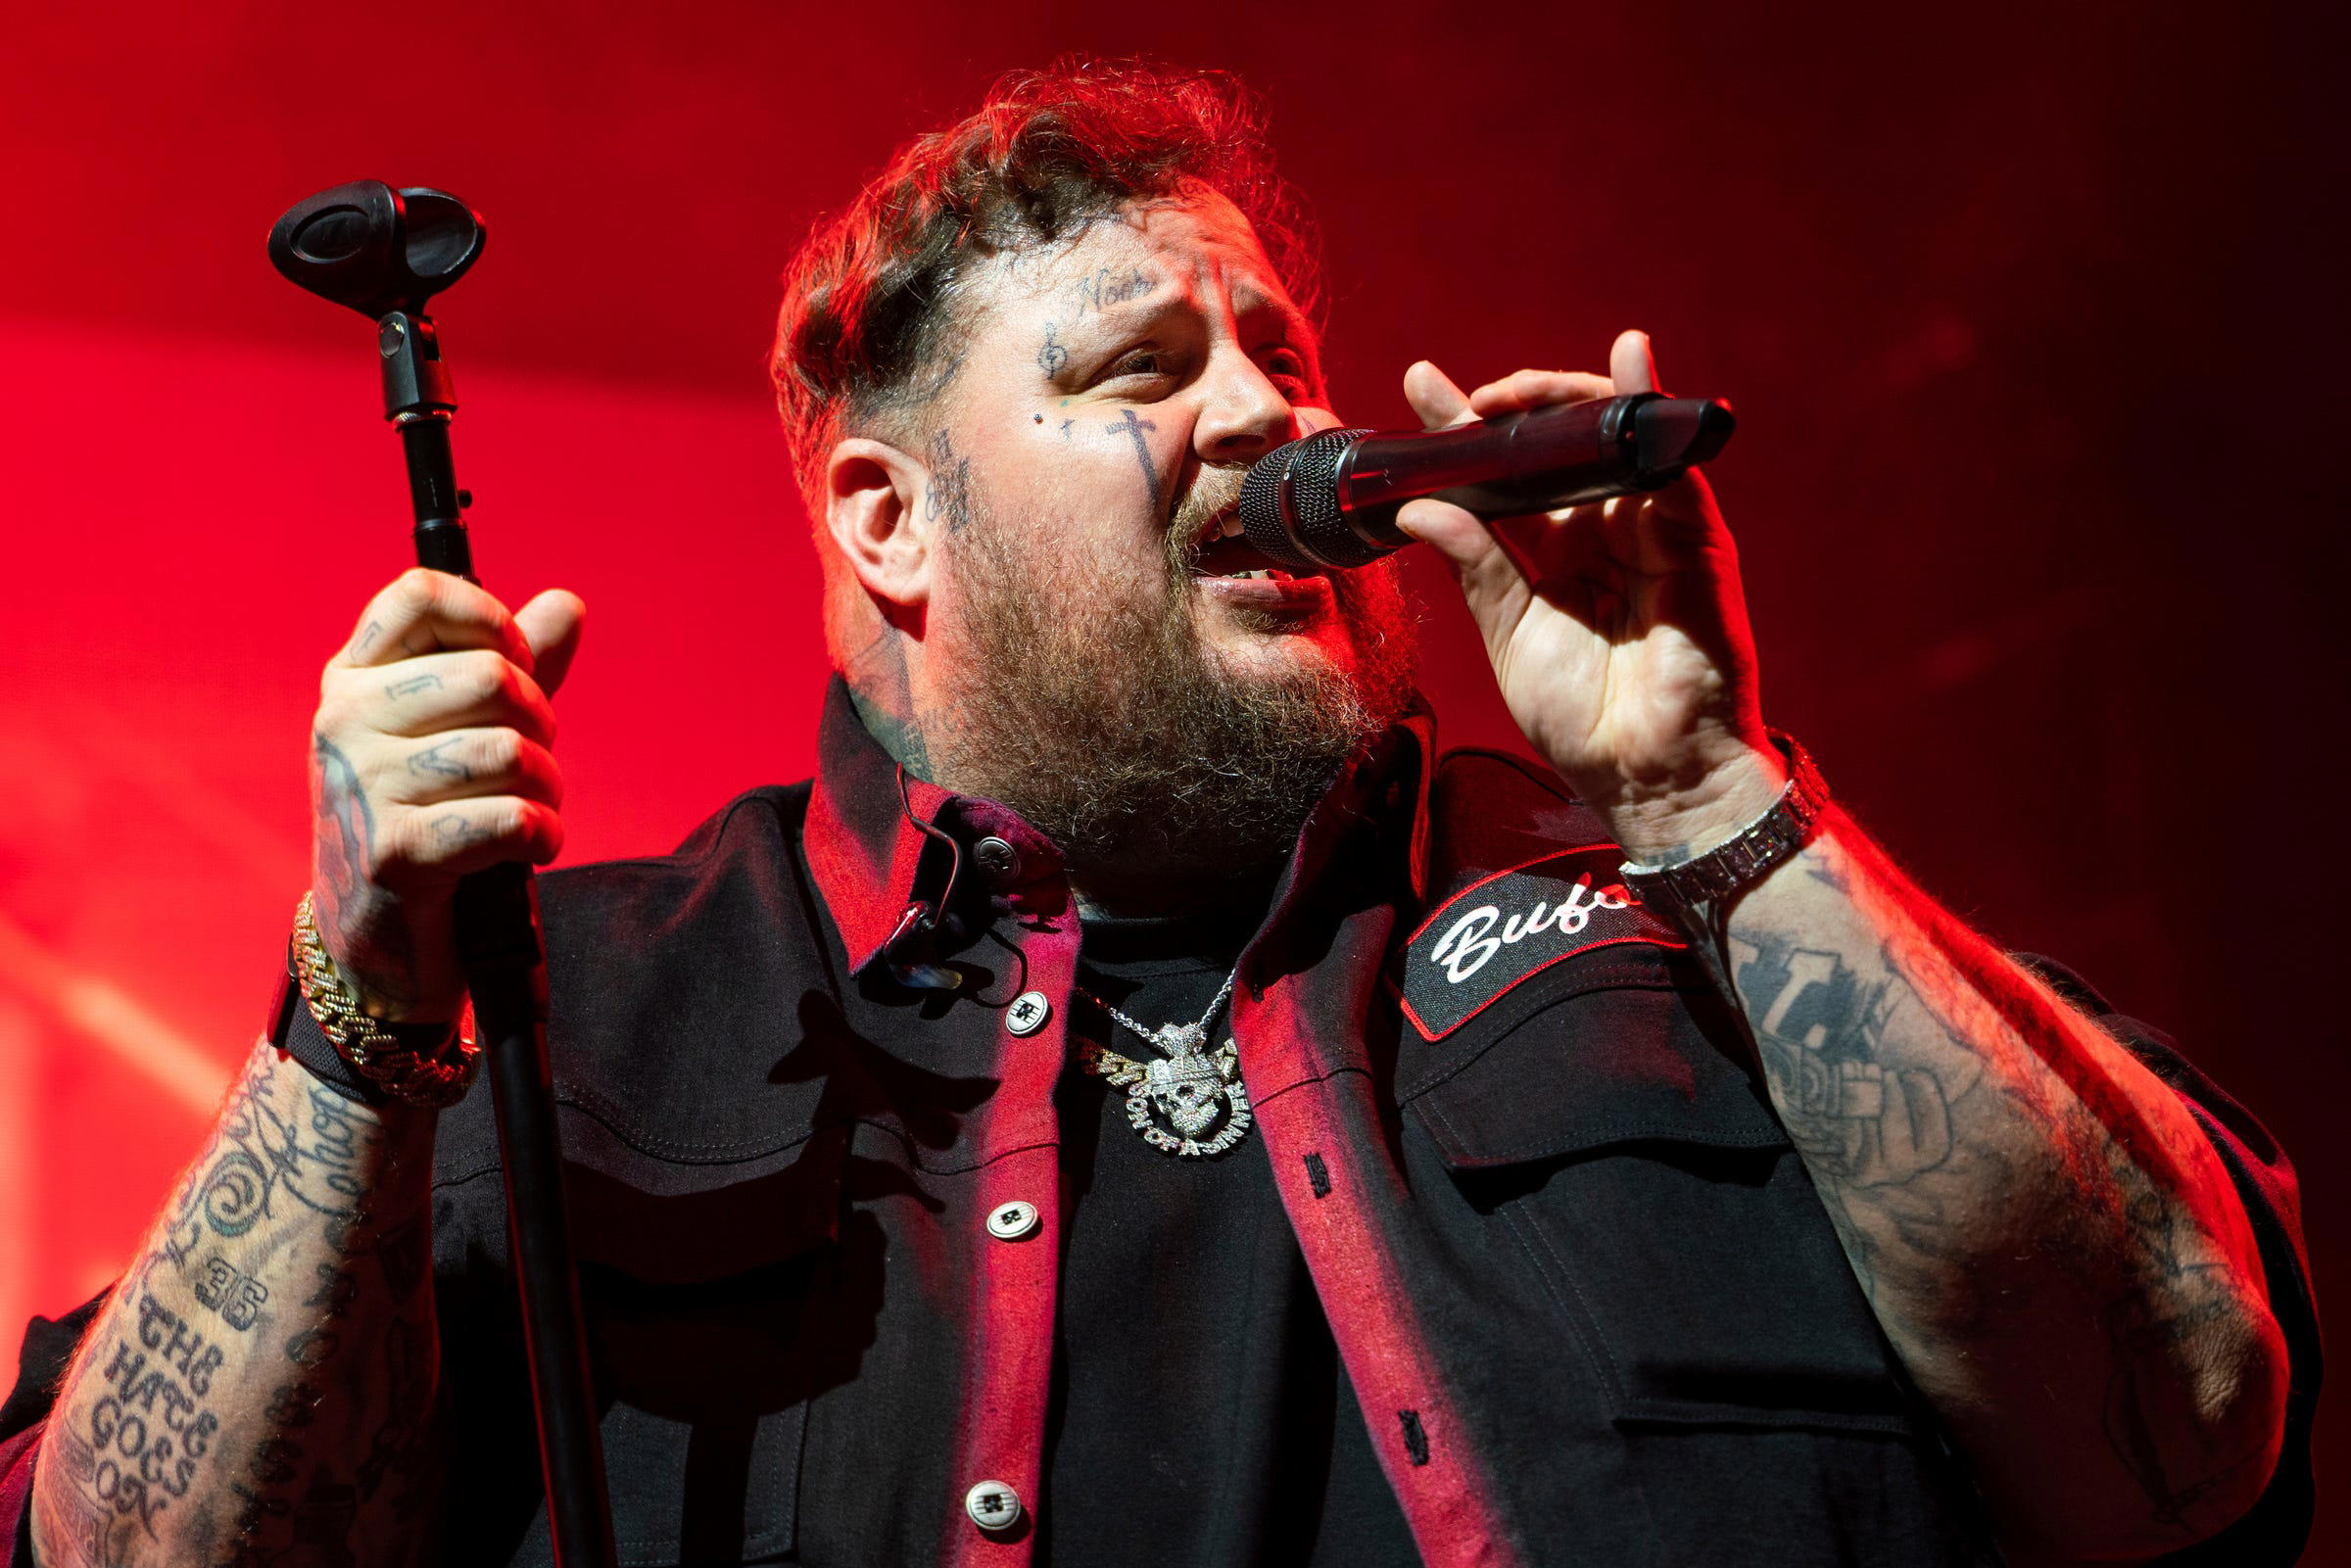 Jelly Roll preaches countryrockrap salvation in Pine Knob headlining debut